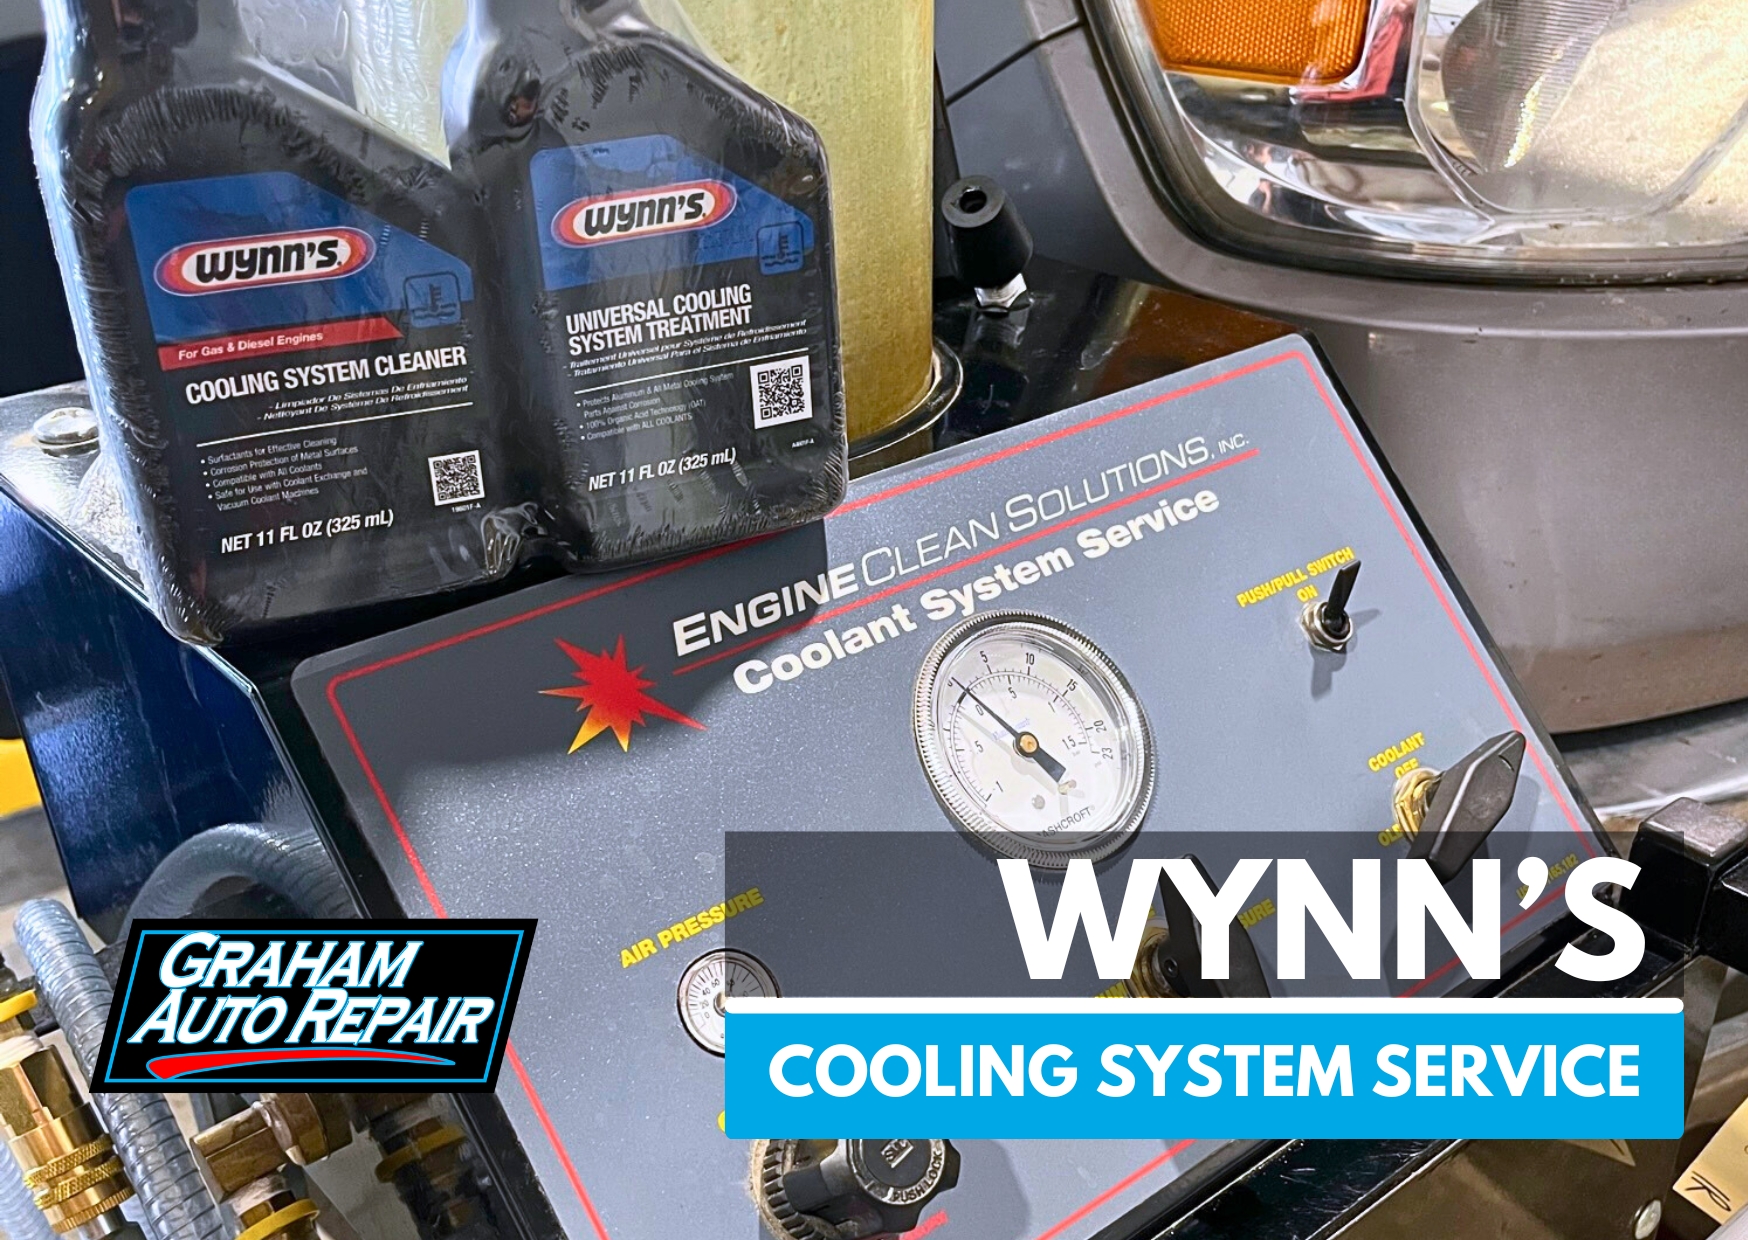 Wynn's Cooling System Service at Graham Auto Repair